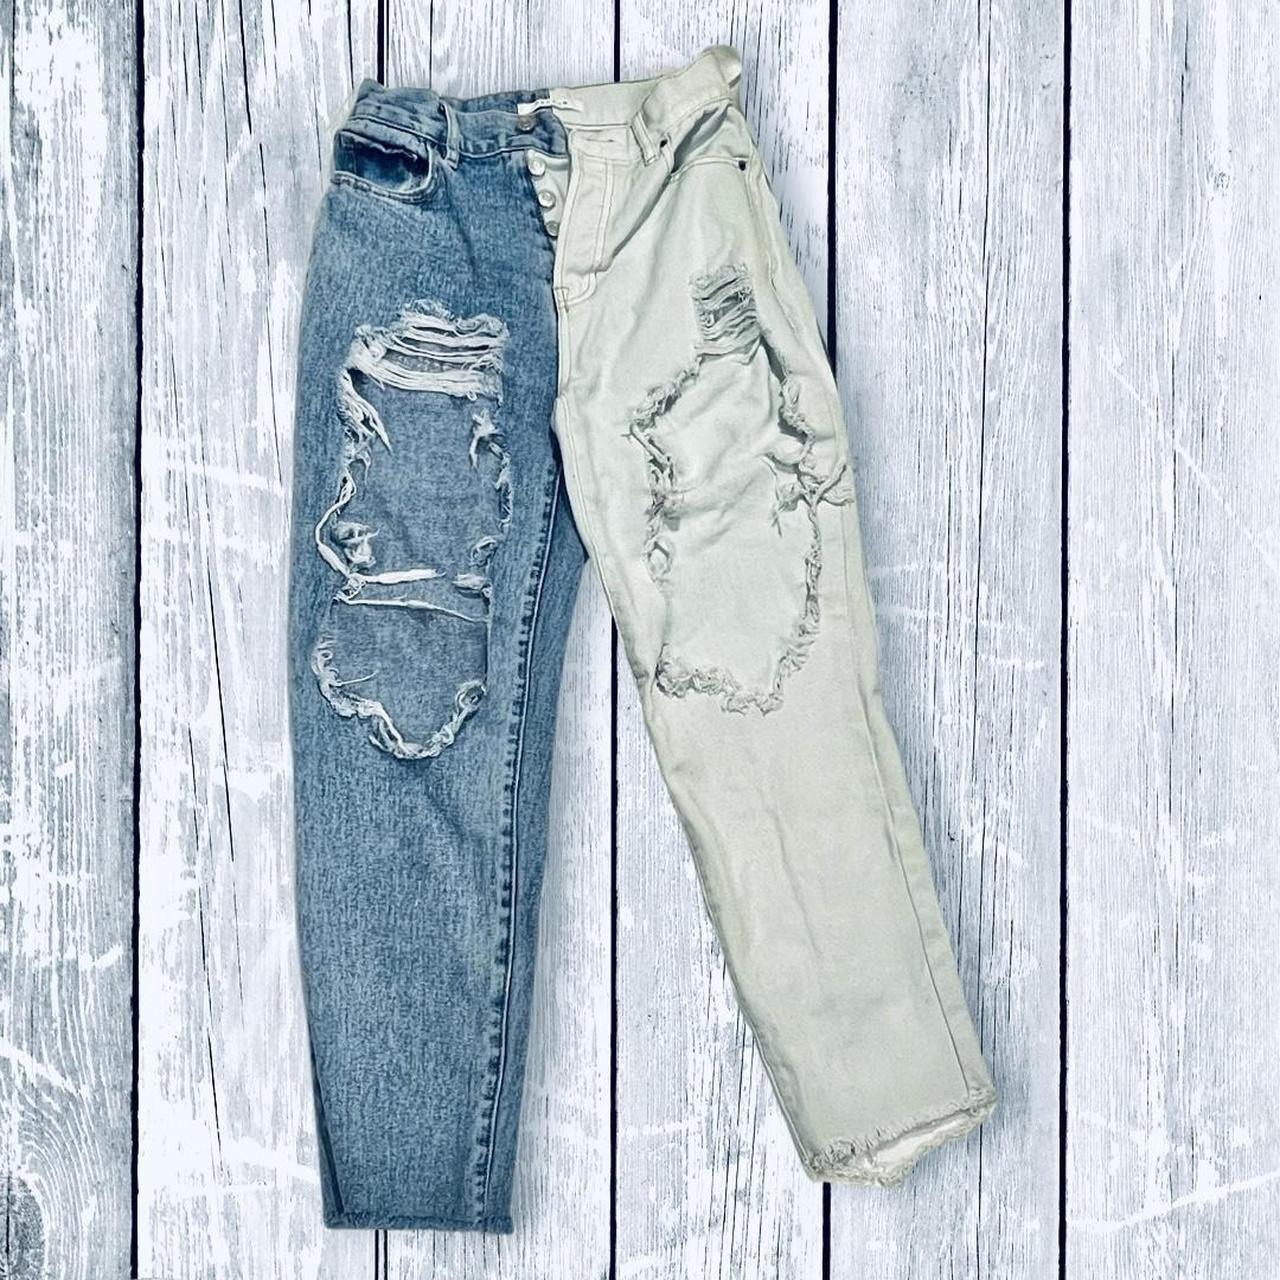 PacSun Women's White and Blue Jeans